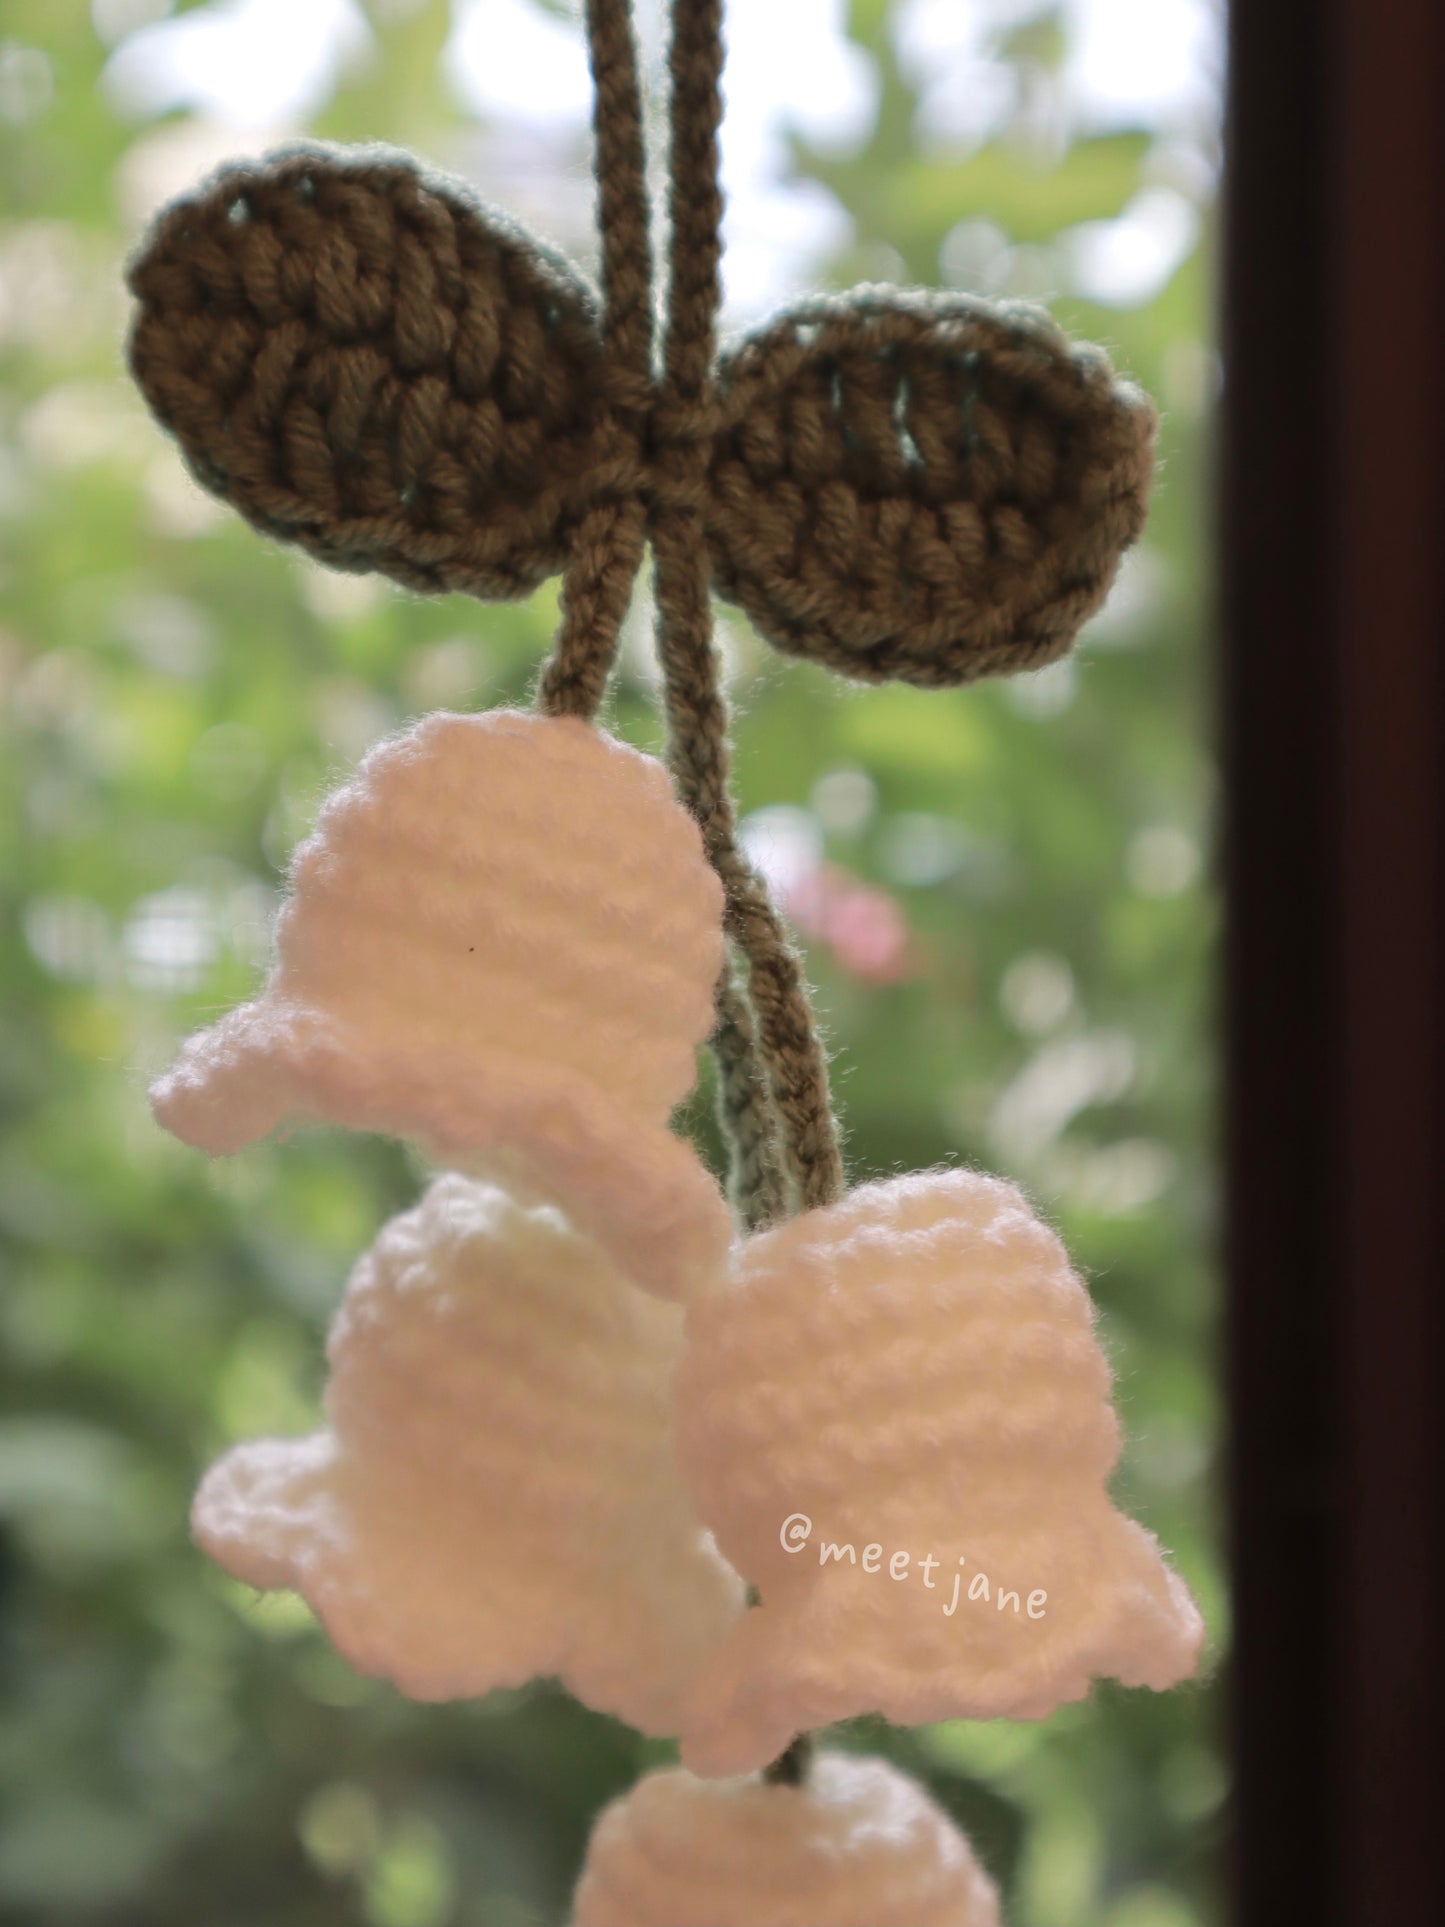 Crochet Accessories|Melbourne | key chain|bag accessories| Lily of the valley